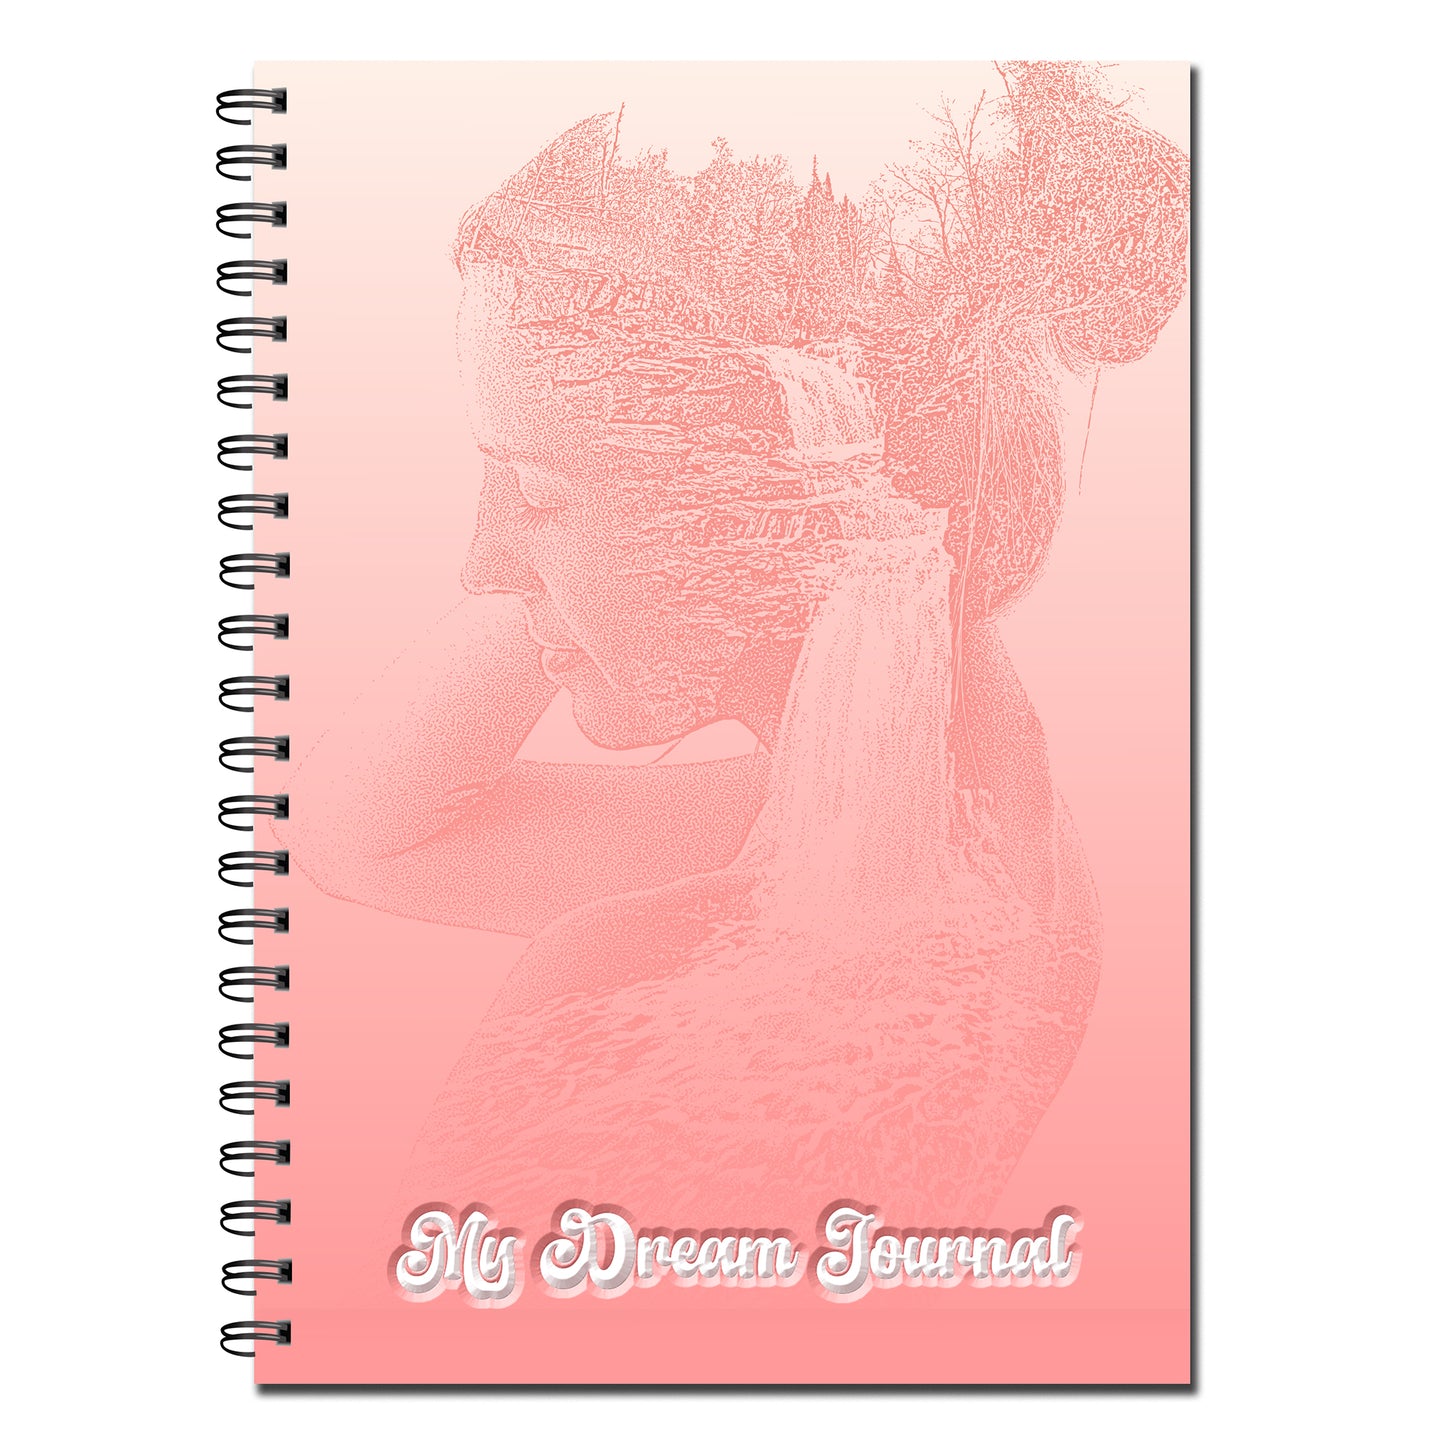 My Dream Journal | Sleep Diary | A5 wirobound book | 50 pages printed to both sides on quality 120gsm